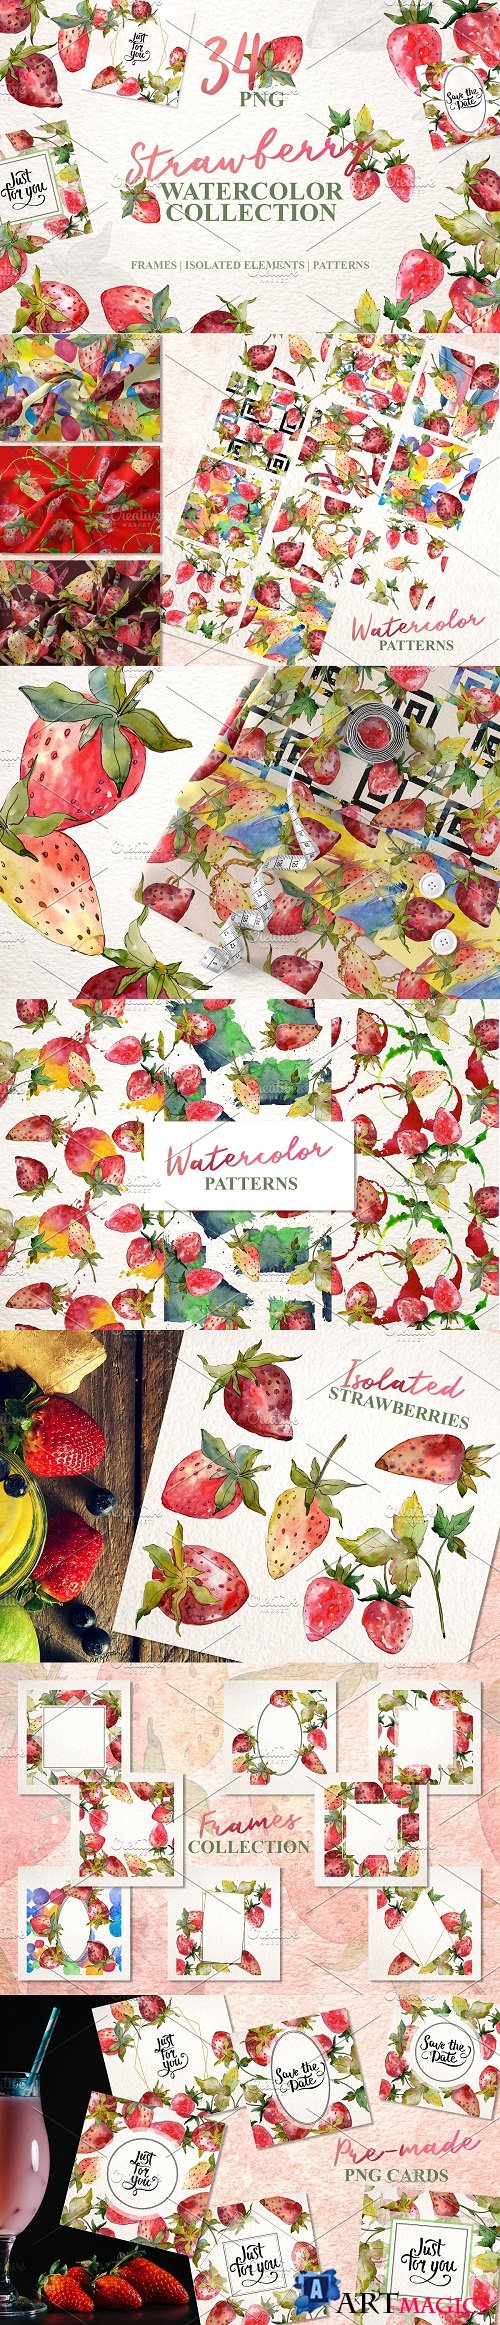 Strawberry collection Watercolor png - 3593345